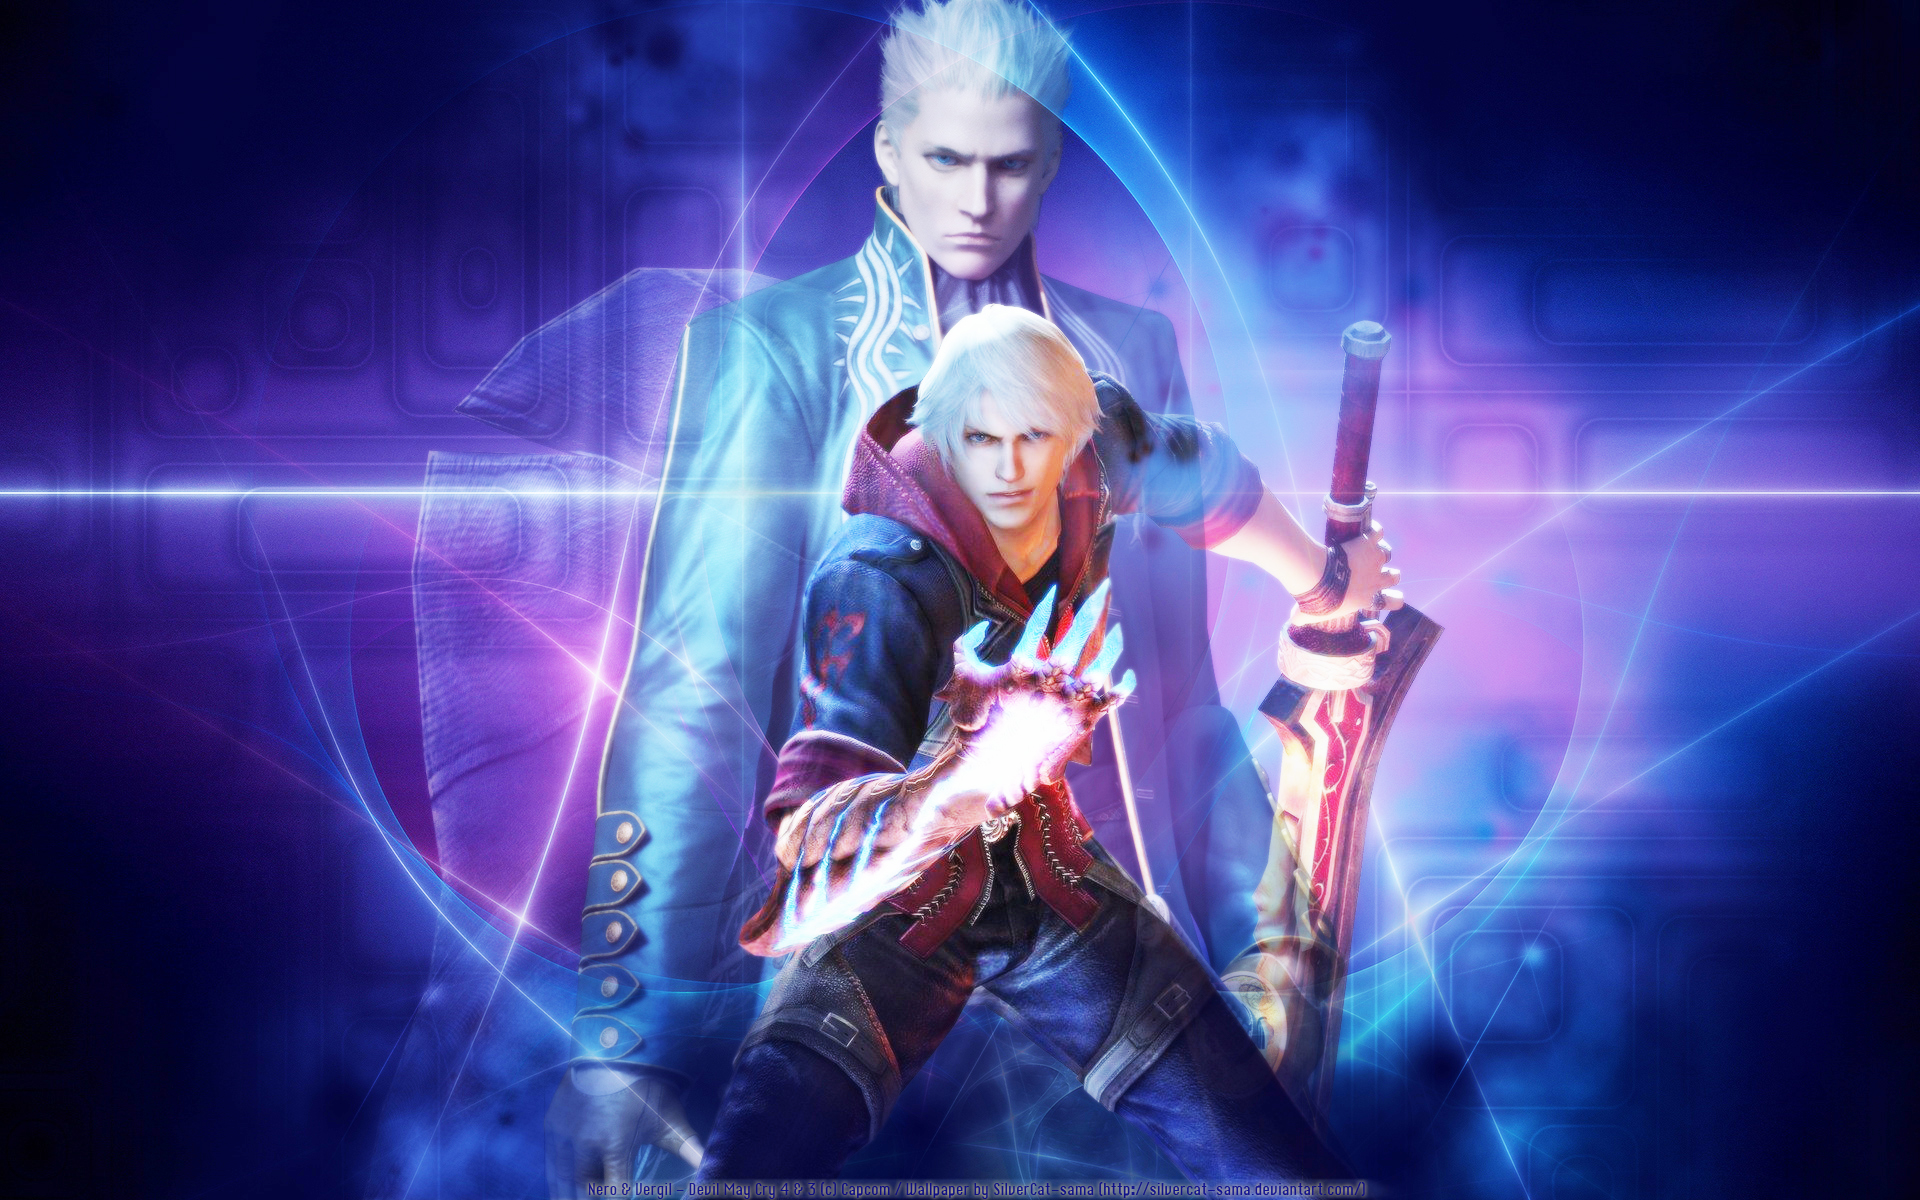 [46+] Devil May Cry Vergil Wallpaper on WallpaperSafari Vergil Devil May Cry 3 Wallpaper